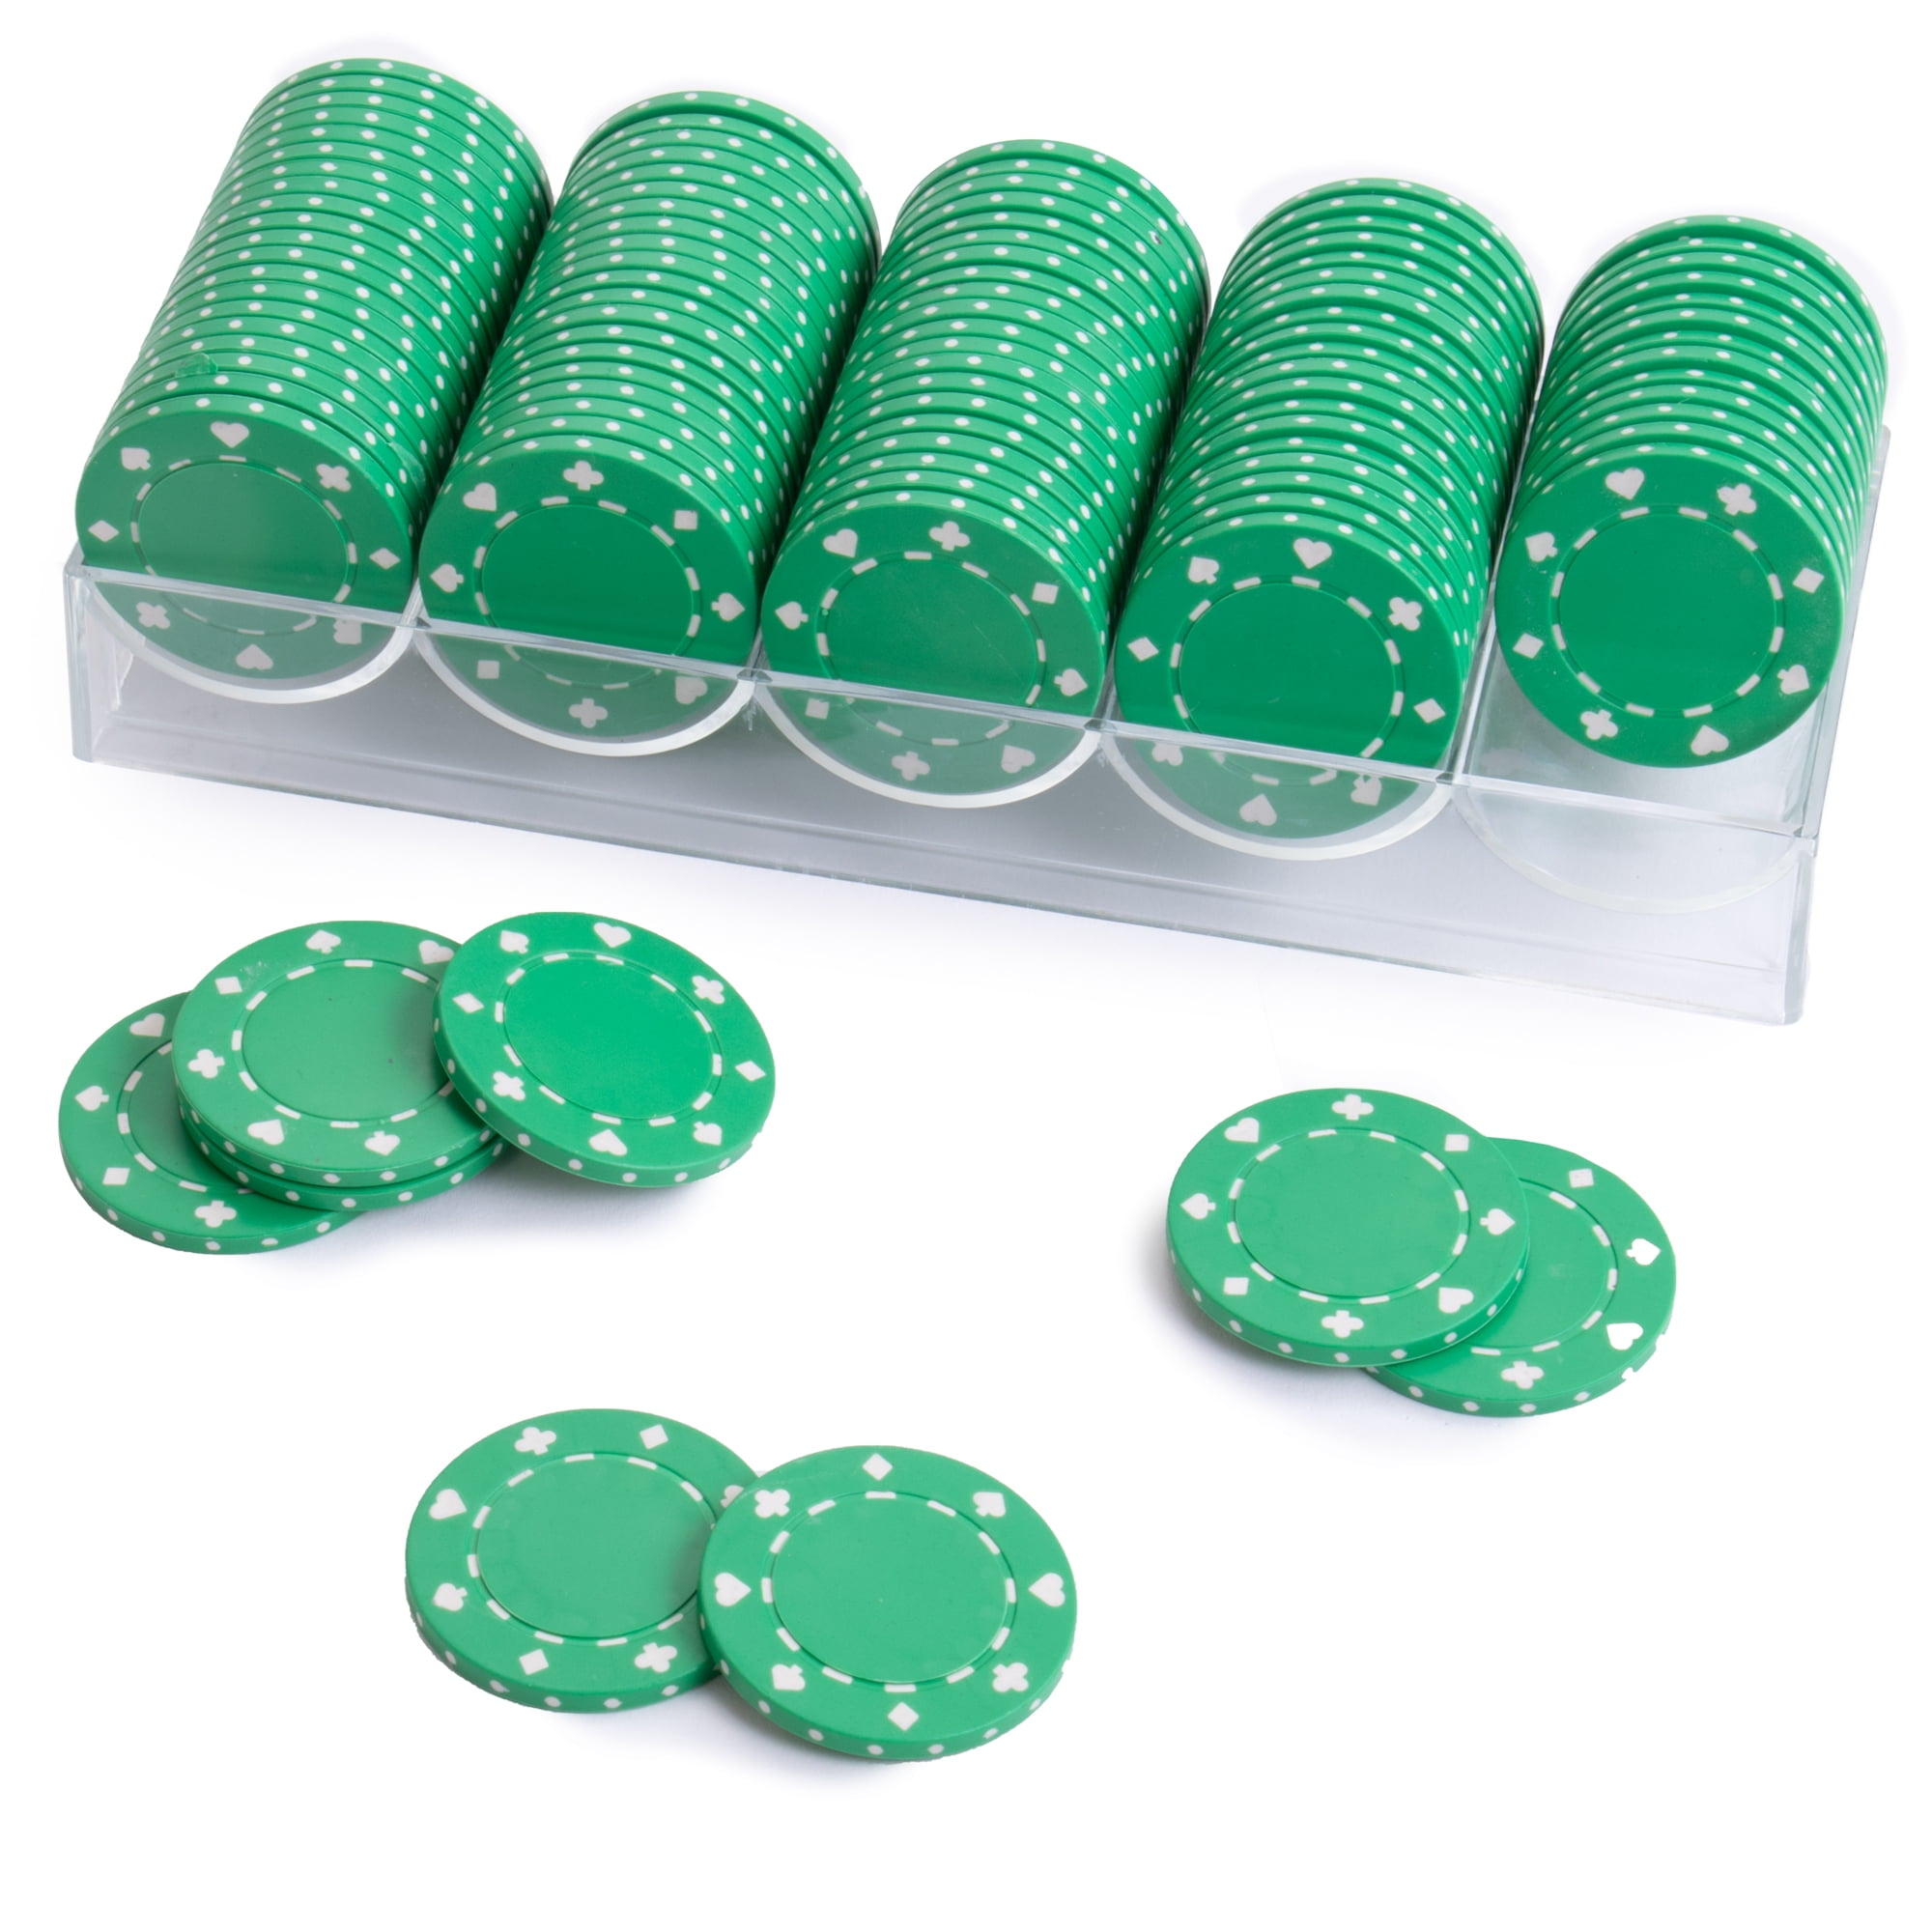 Rack Me Bundle - Clear Acrylic Tray with 100 Pack Standard Suited Poker Chips, Choose Your Color - Lightweight Casino Bulk Game Accessories with Holder - Counting Bingo Markers - Walmart.com